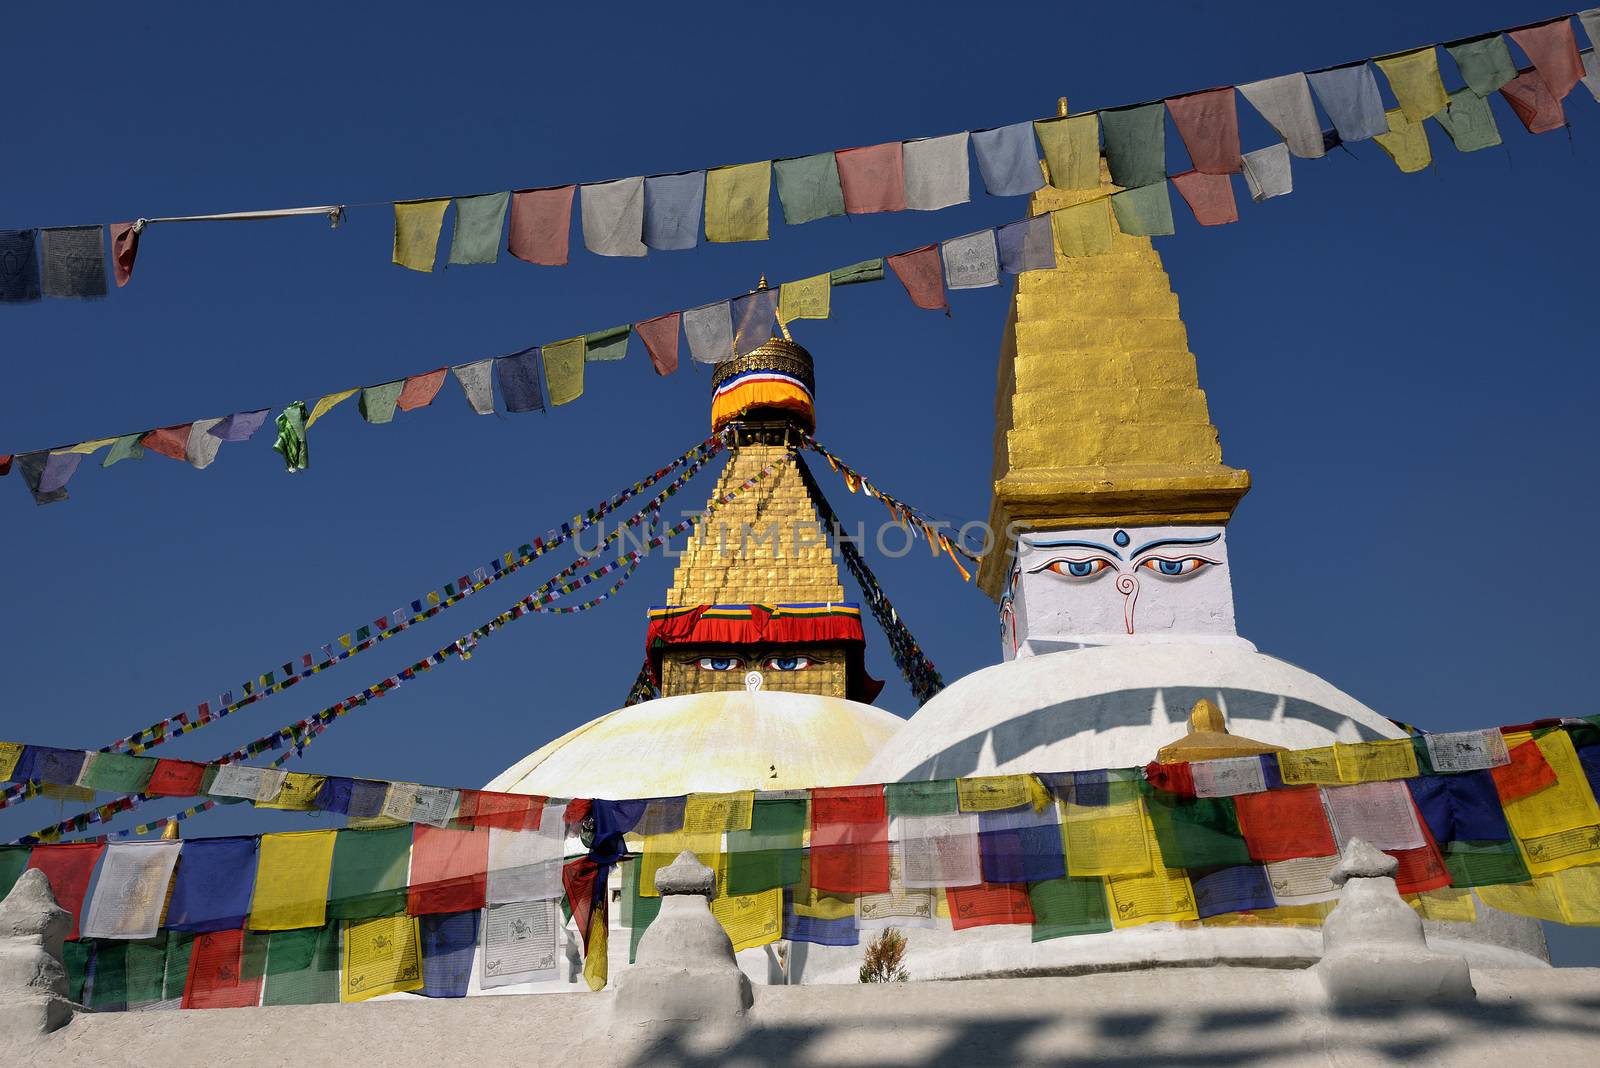 Boudhanath Stupa. Golden spire and all seeing Buddha eyes on top by think4photop